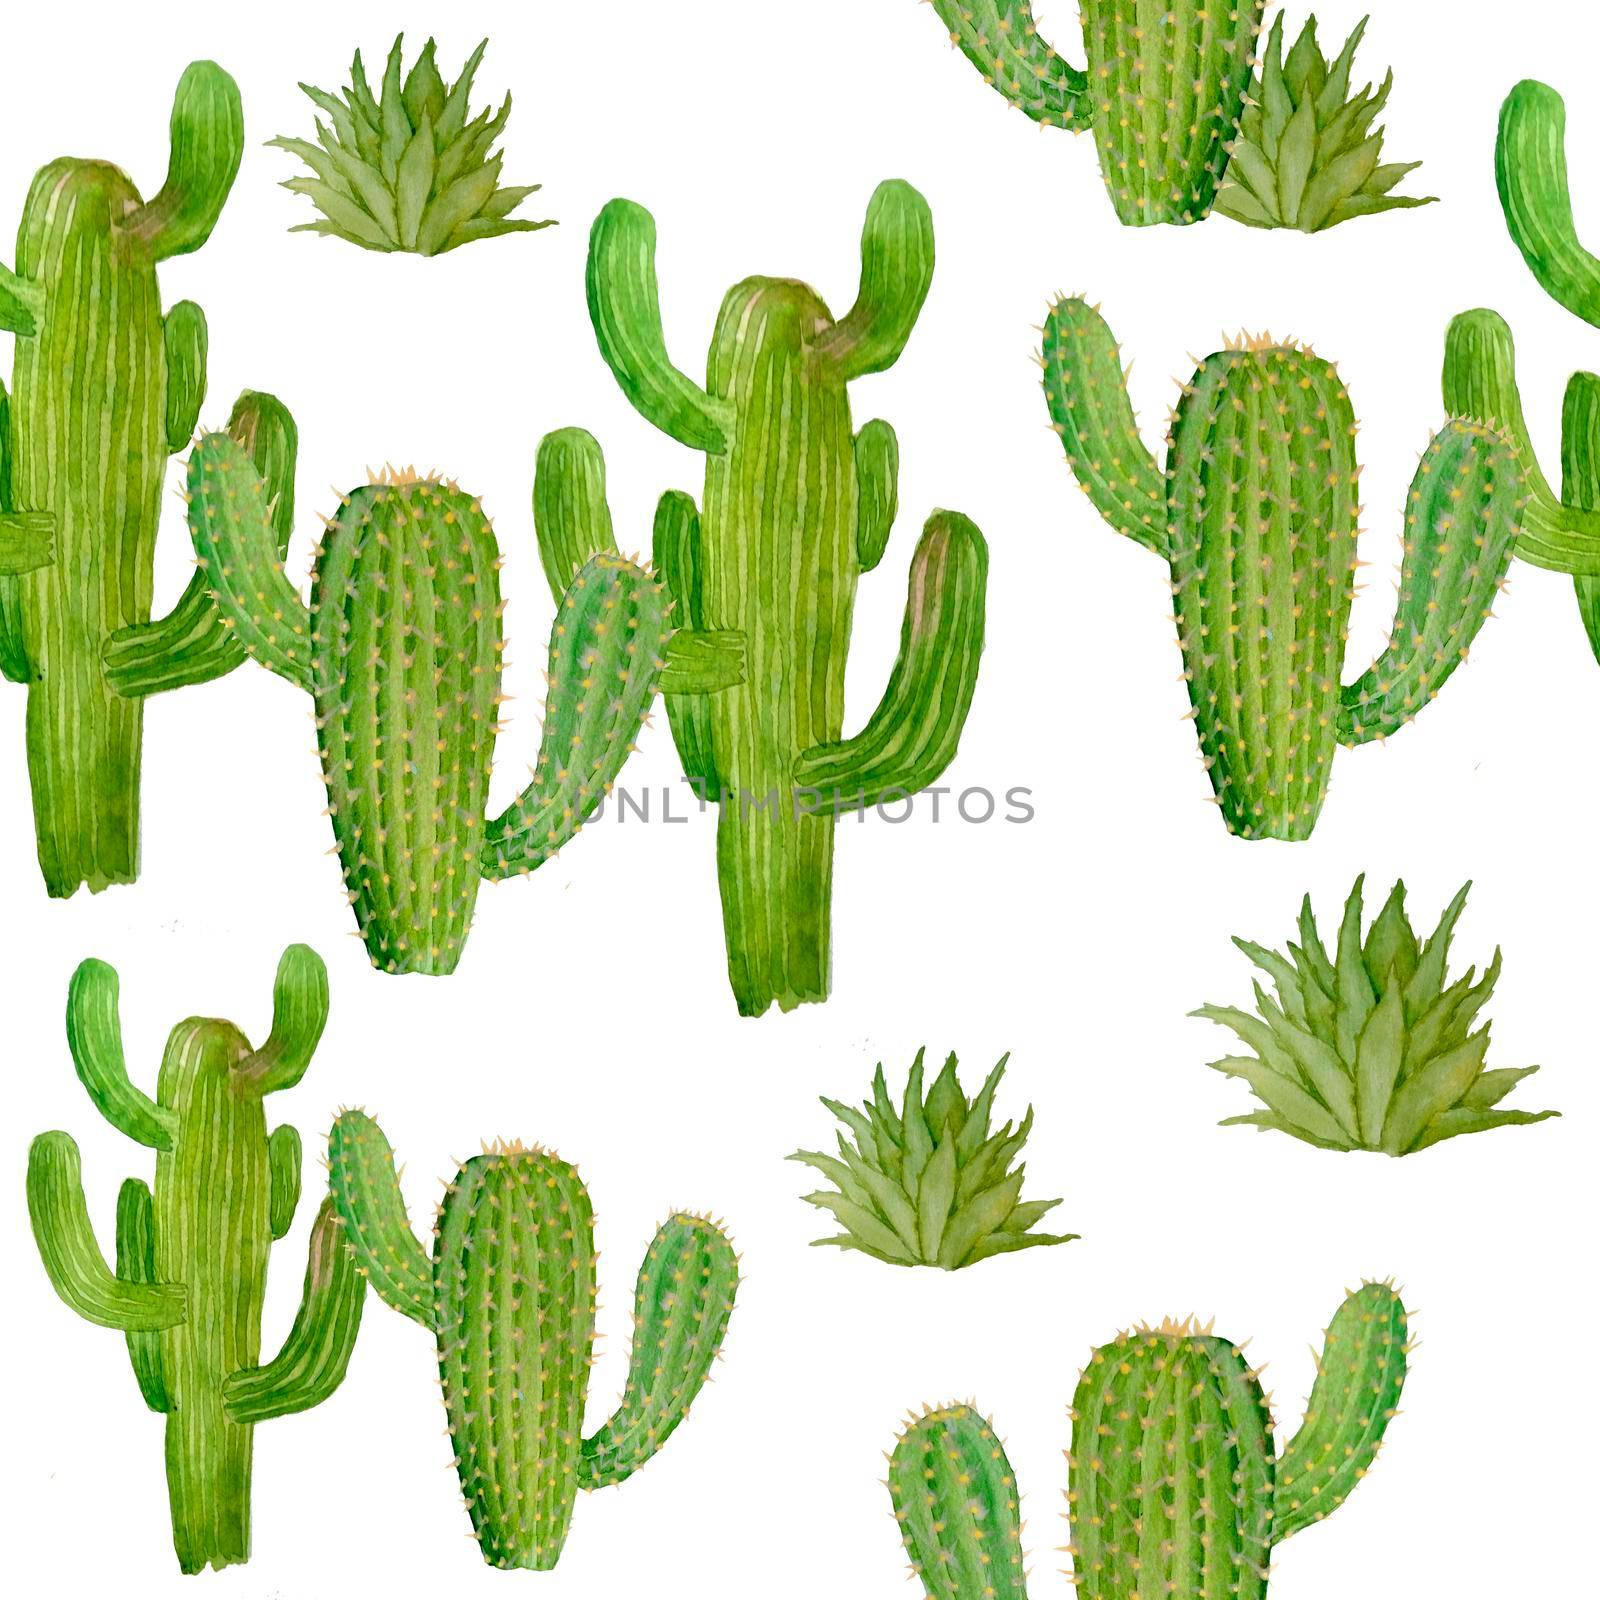 Watercolor hand drawn seamless pattern of tropical mexican cactus cacti succulents. Green natural house plants in pots botanical illsutration print interior design decoration for wallpaper textile. by Lagmar